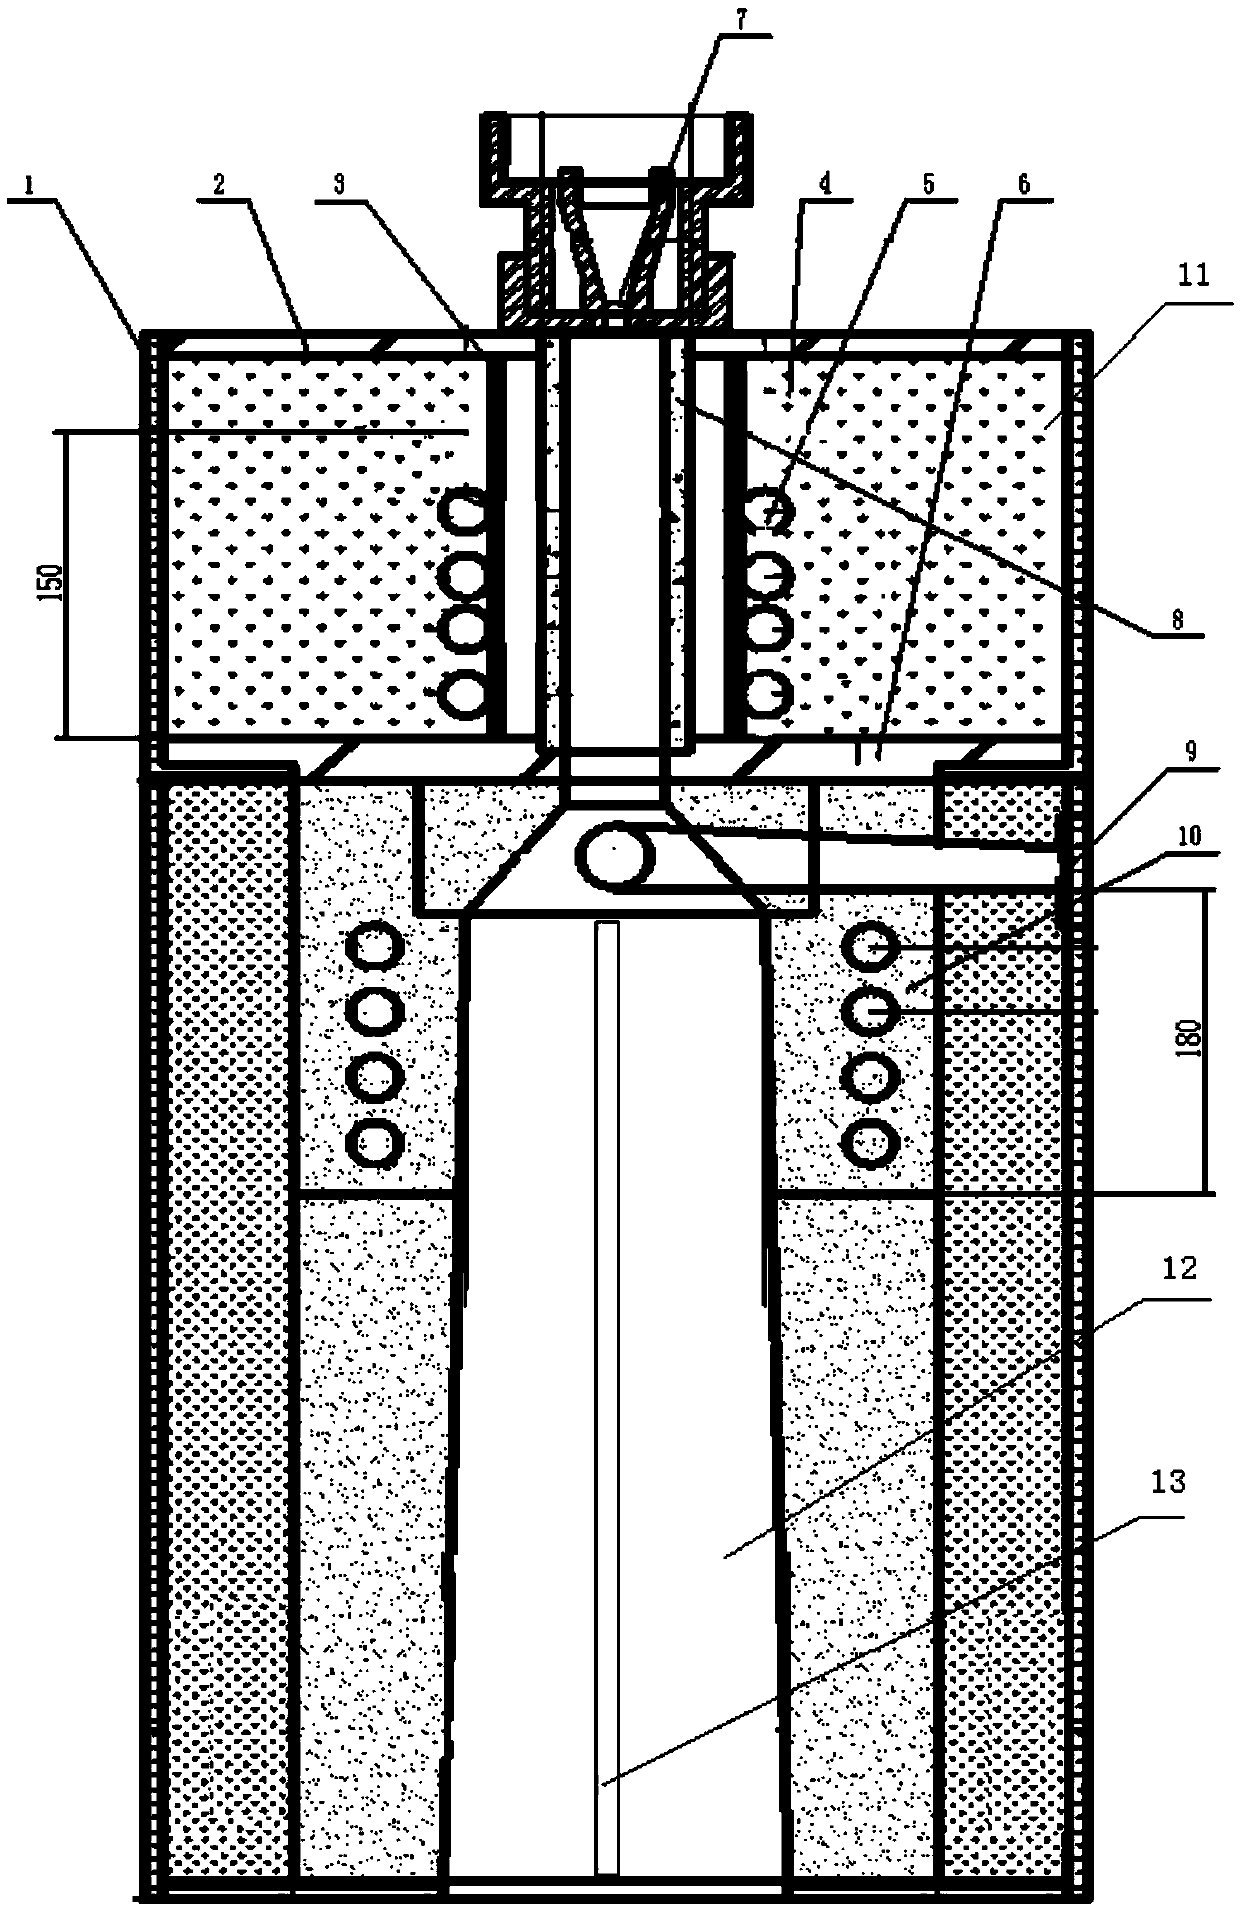 Inductively heated rutile single crystal growth furnace and method for preparing rutile by using same